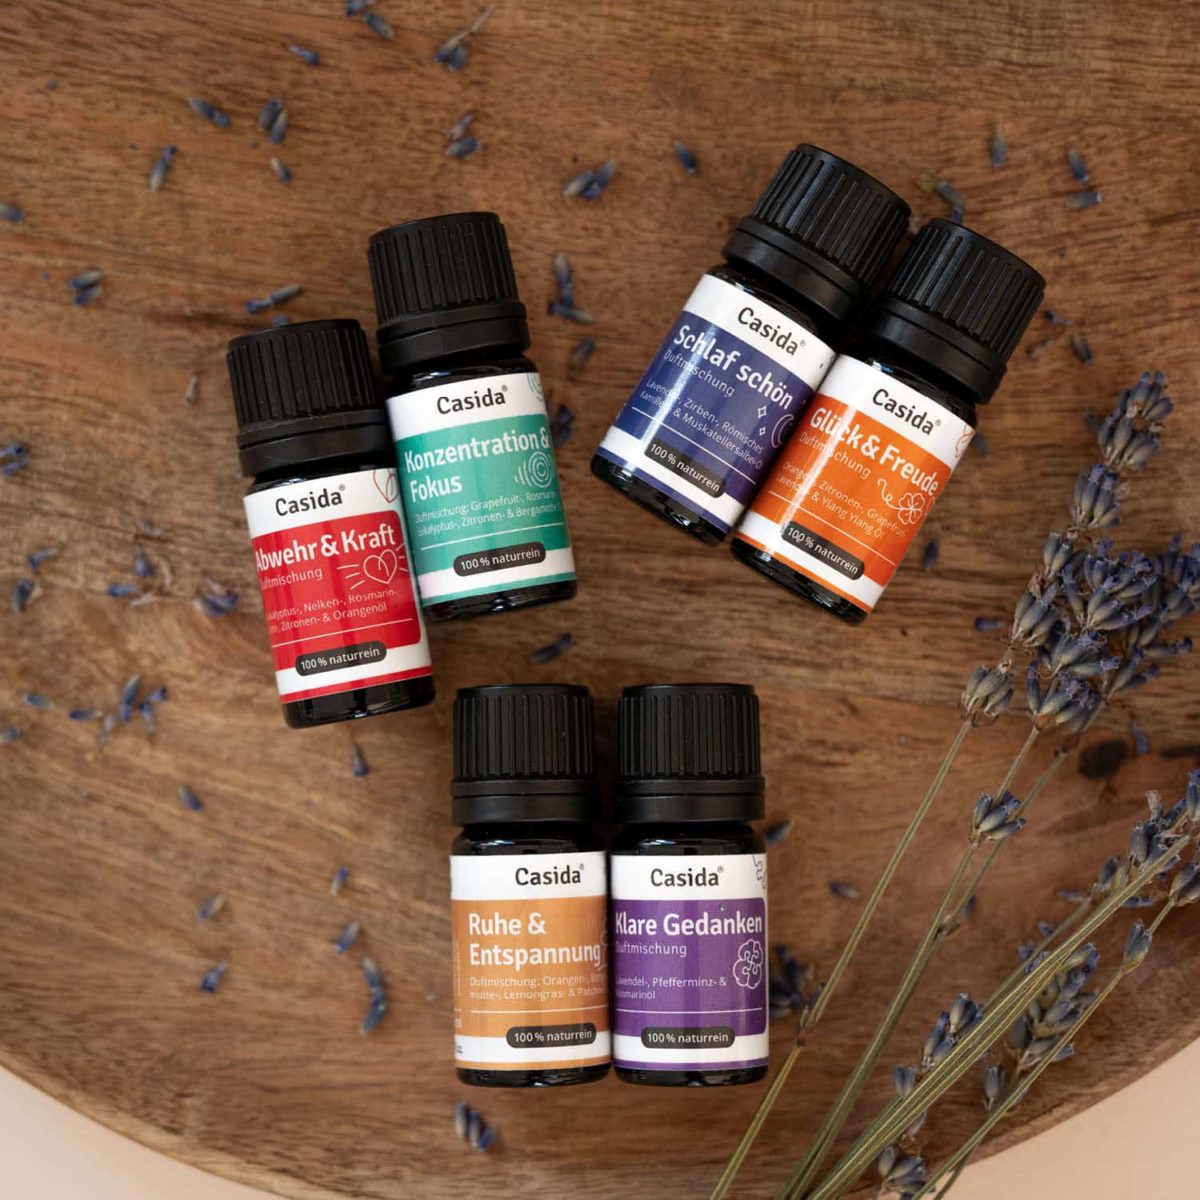 Casida TOP 6 Essential Oil Blends Box Set (each 5 ml) 17582437 PZN pharmacy oil blends aromatherapy aroma diffuser